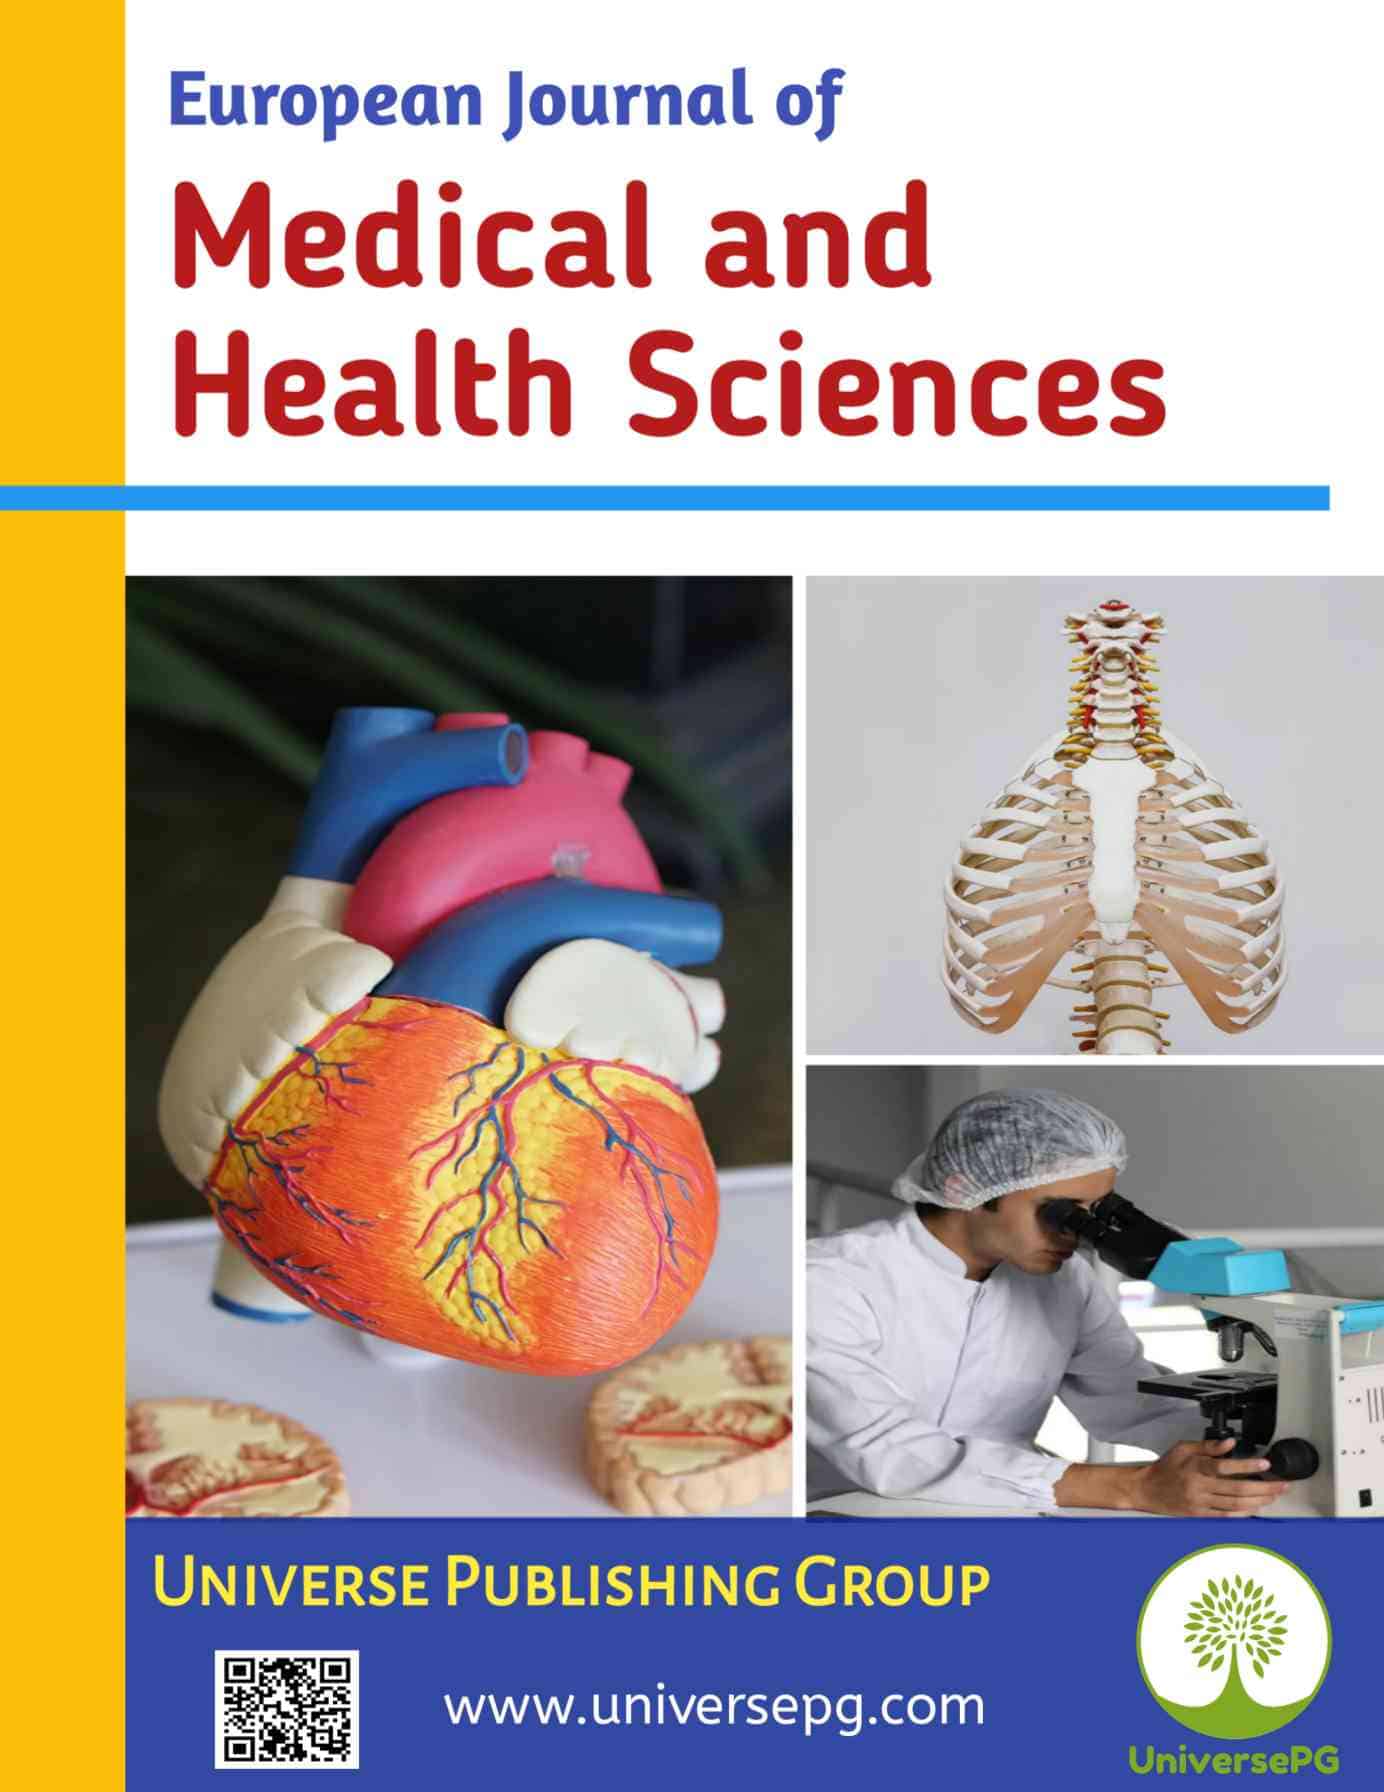 European Journal of Medical and Health Sciences